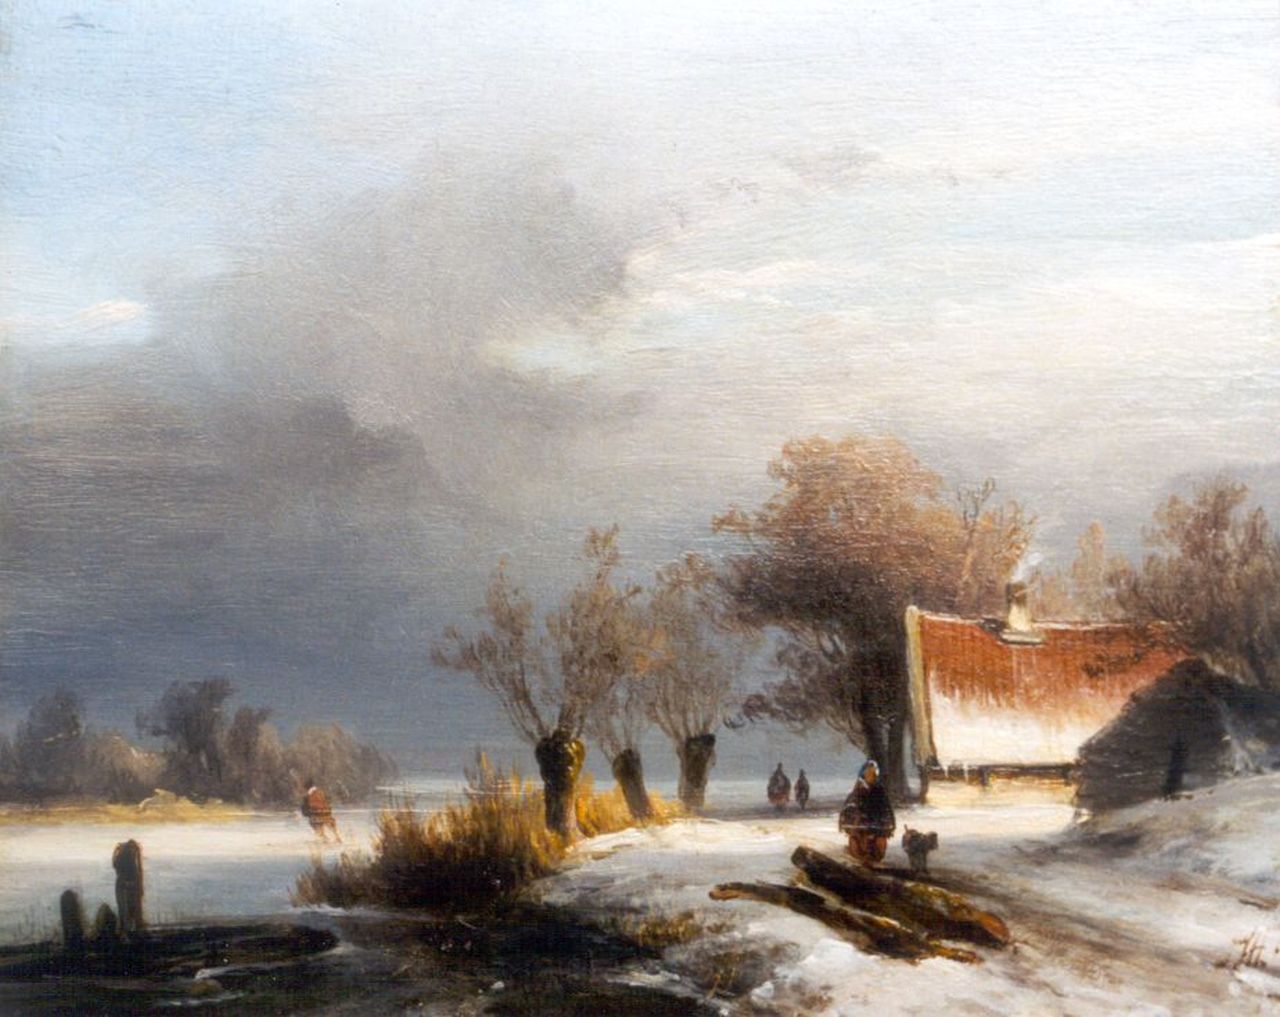 Hoppenbrouwers J.F.  | Johannes Franciscus Hoppenbrouwers, A skater on a frozen waterway, oil on panel 16.0 x 19.5 cm, signed l.r. with monogram